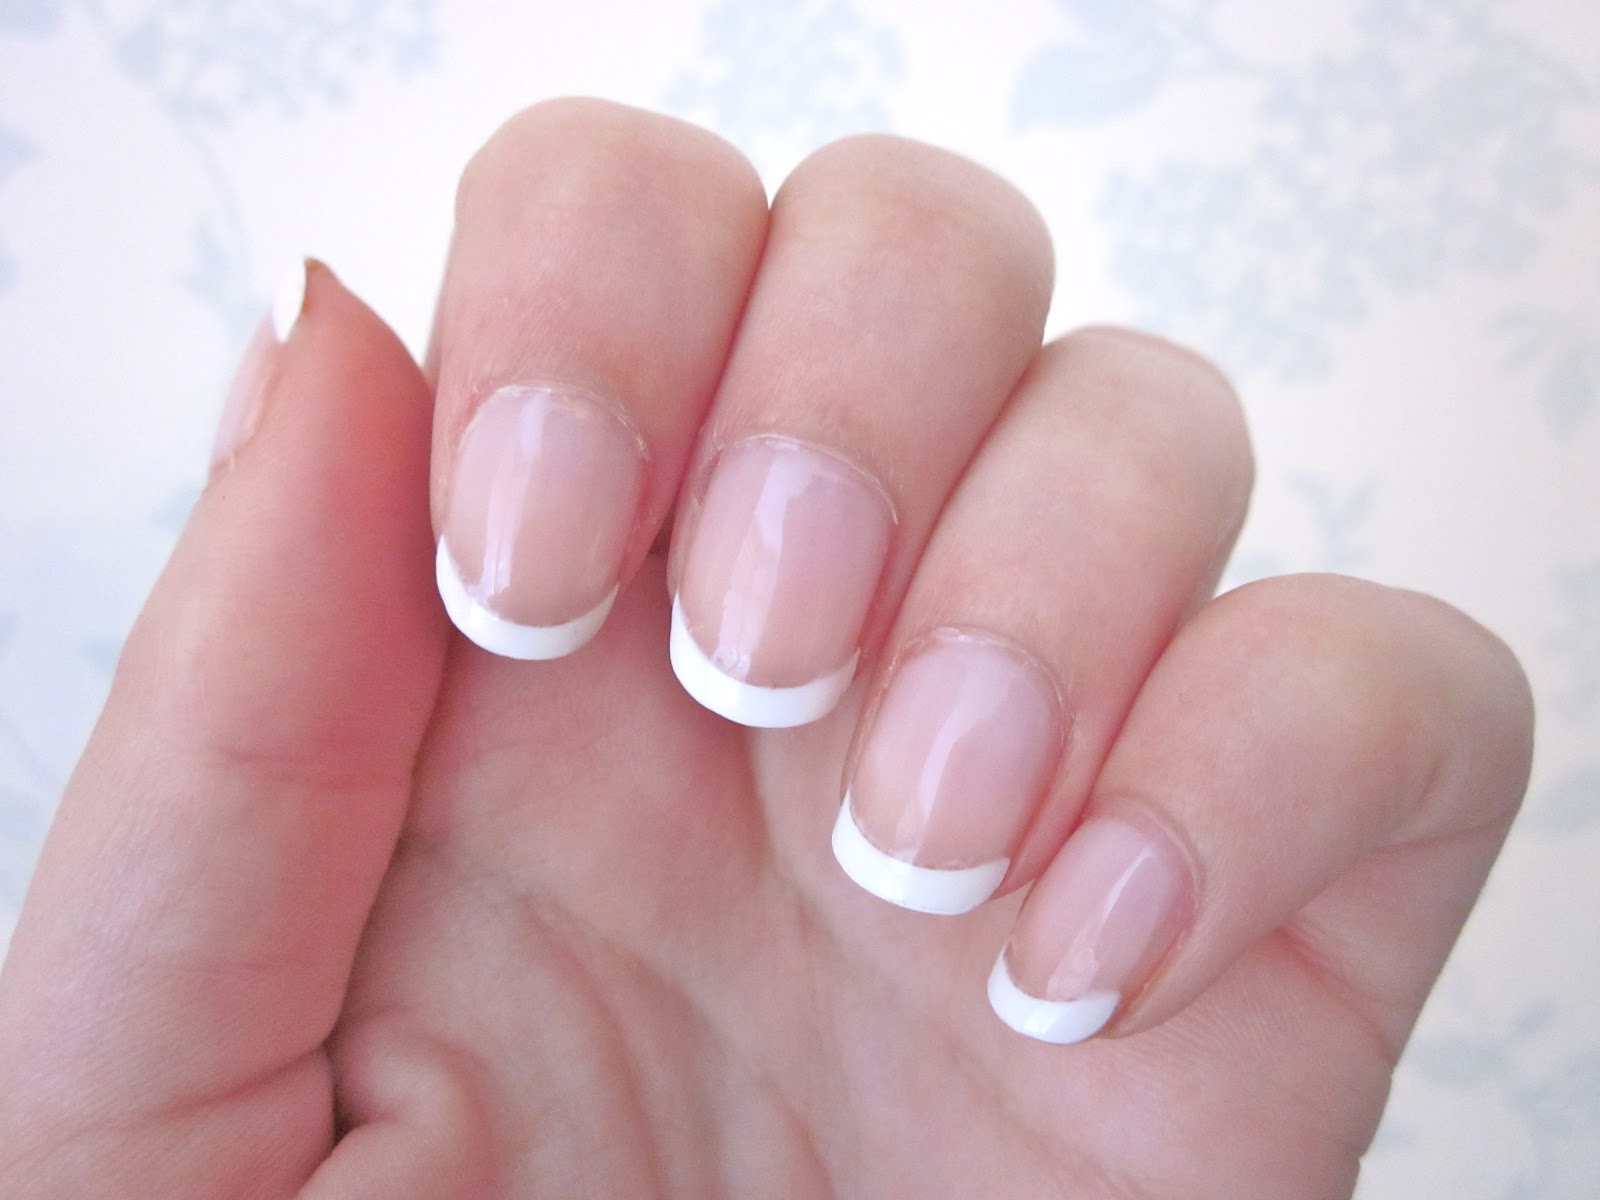 3. French Manicure Nail Art Inspiration - wide 8